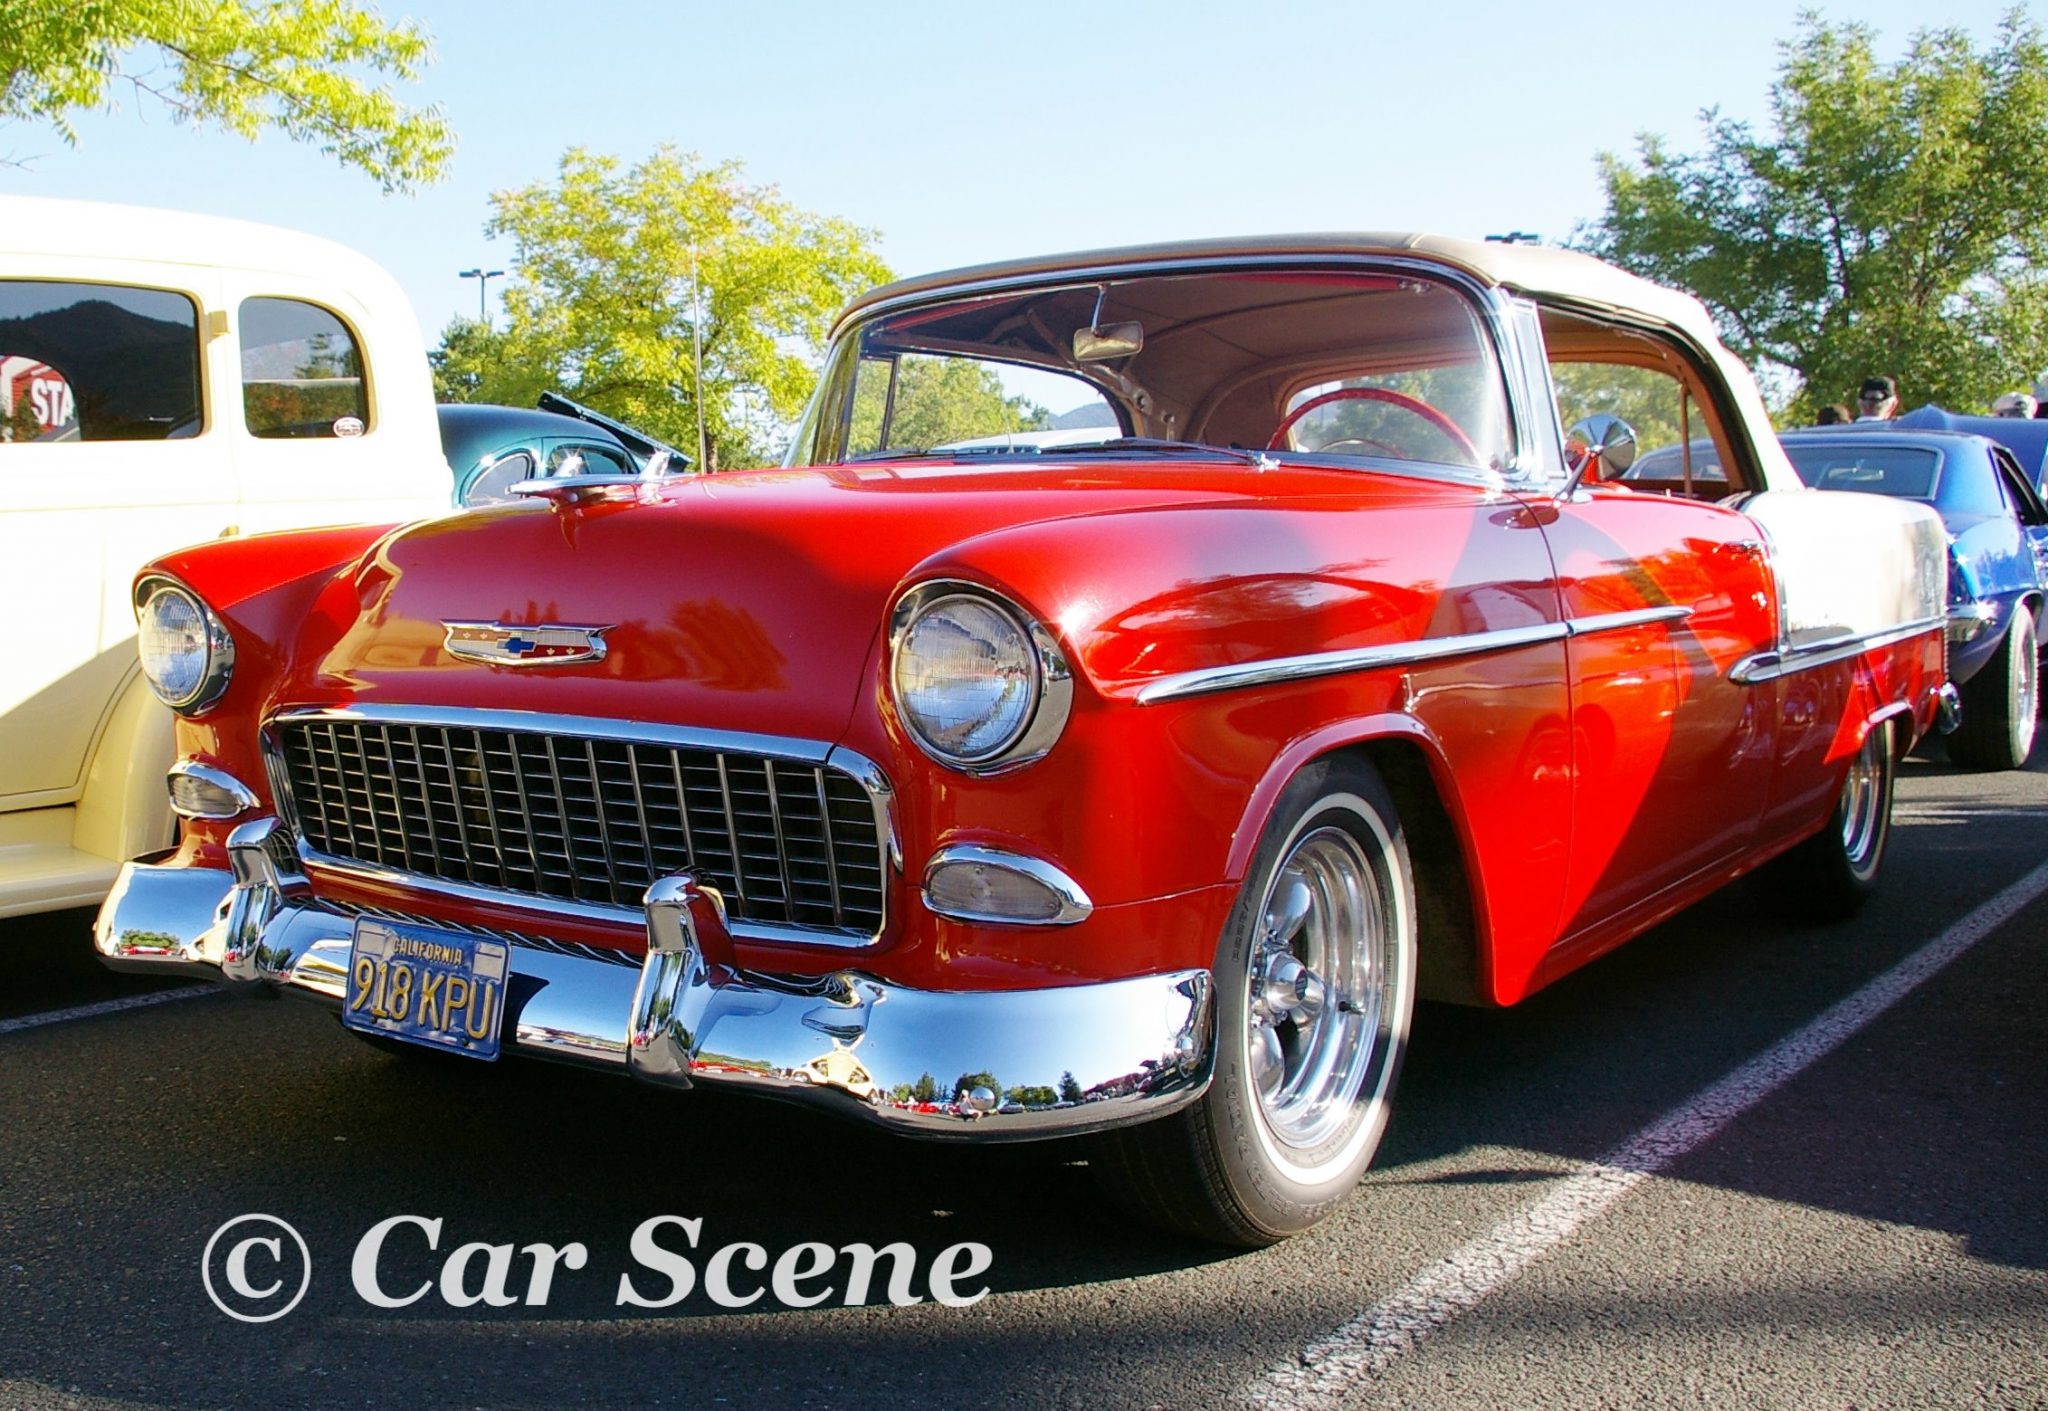 1955 Chevrolet Bel Air Convertible front three quarters view